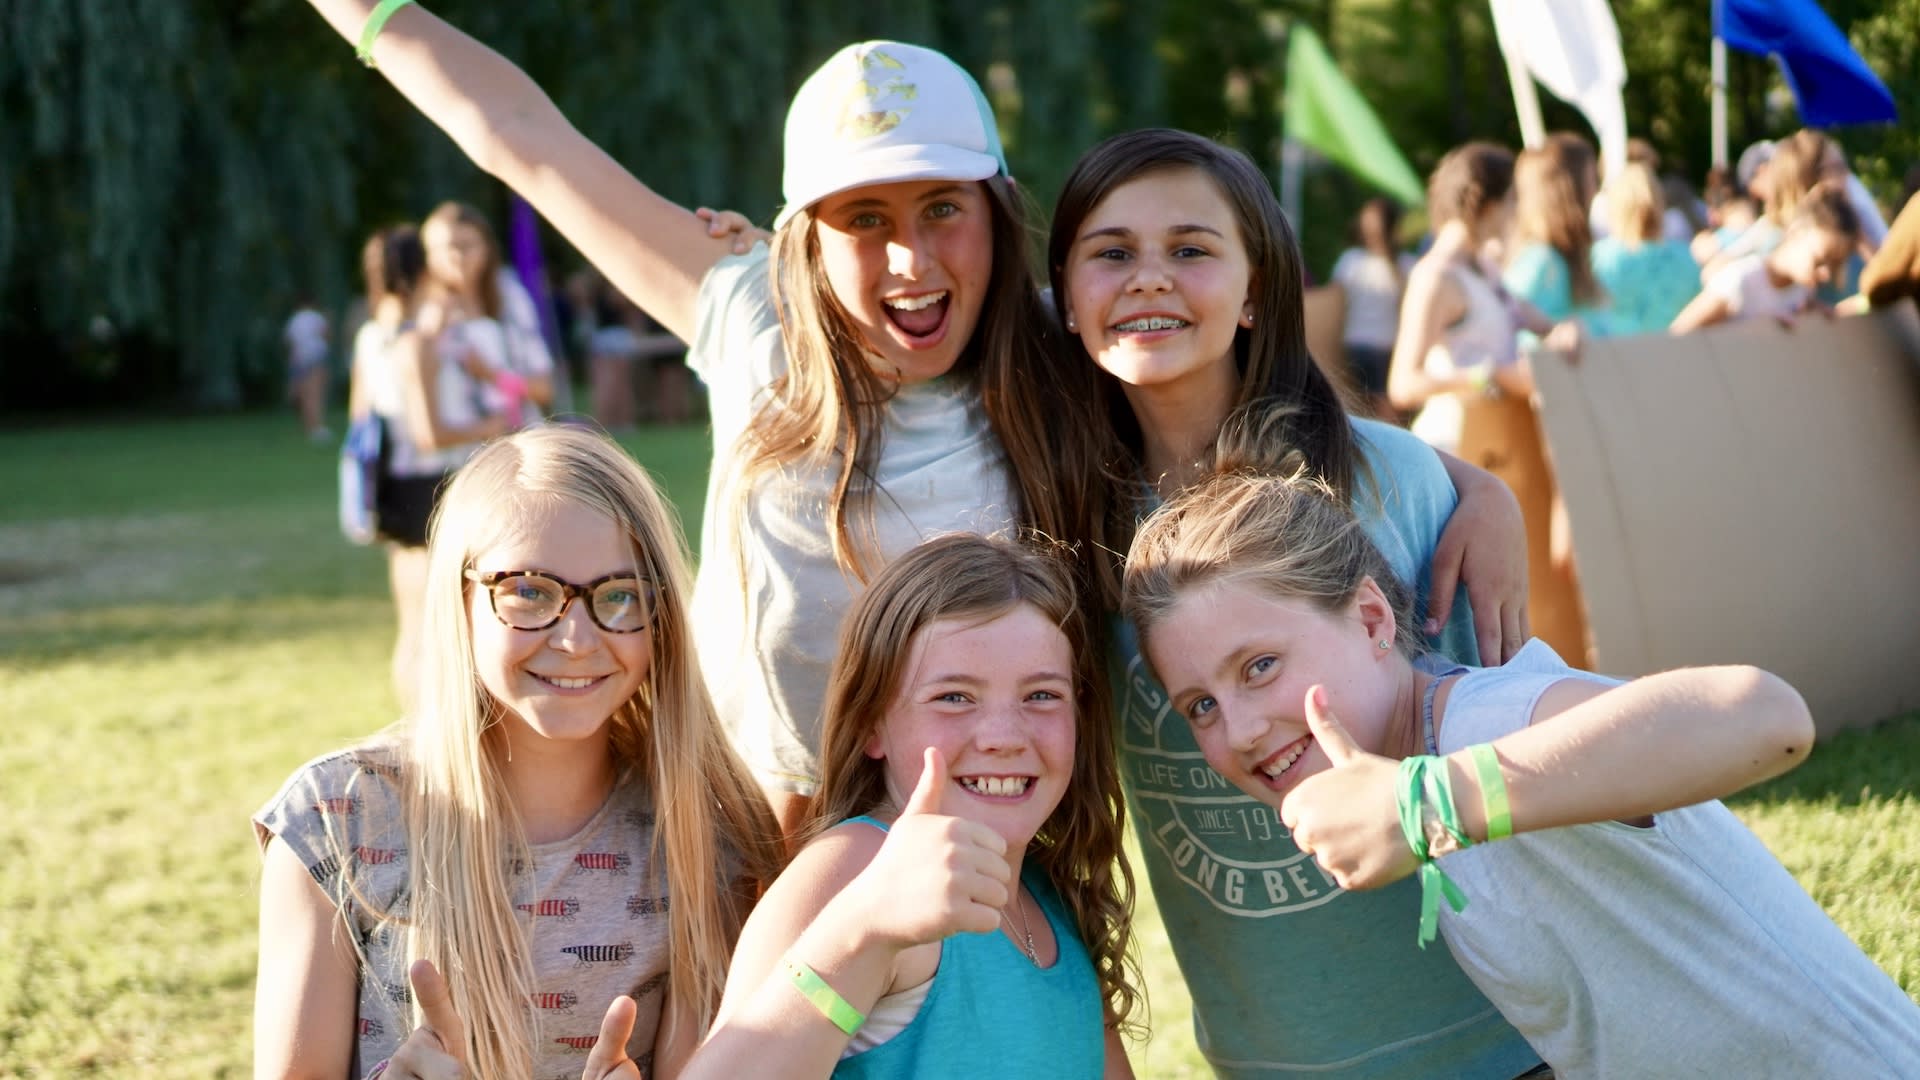 A group of five girls pose together at camp.